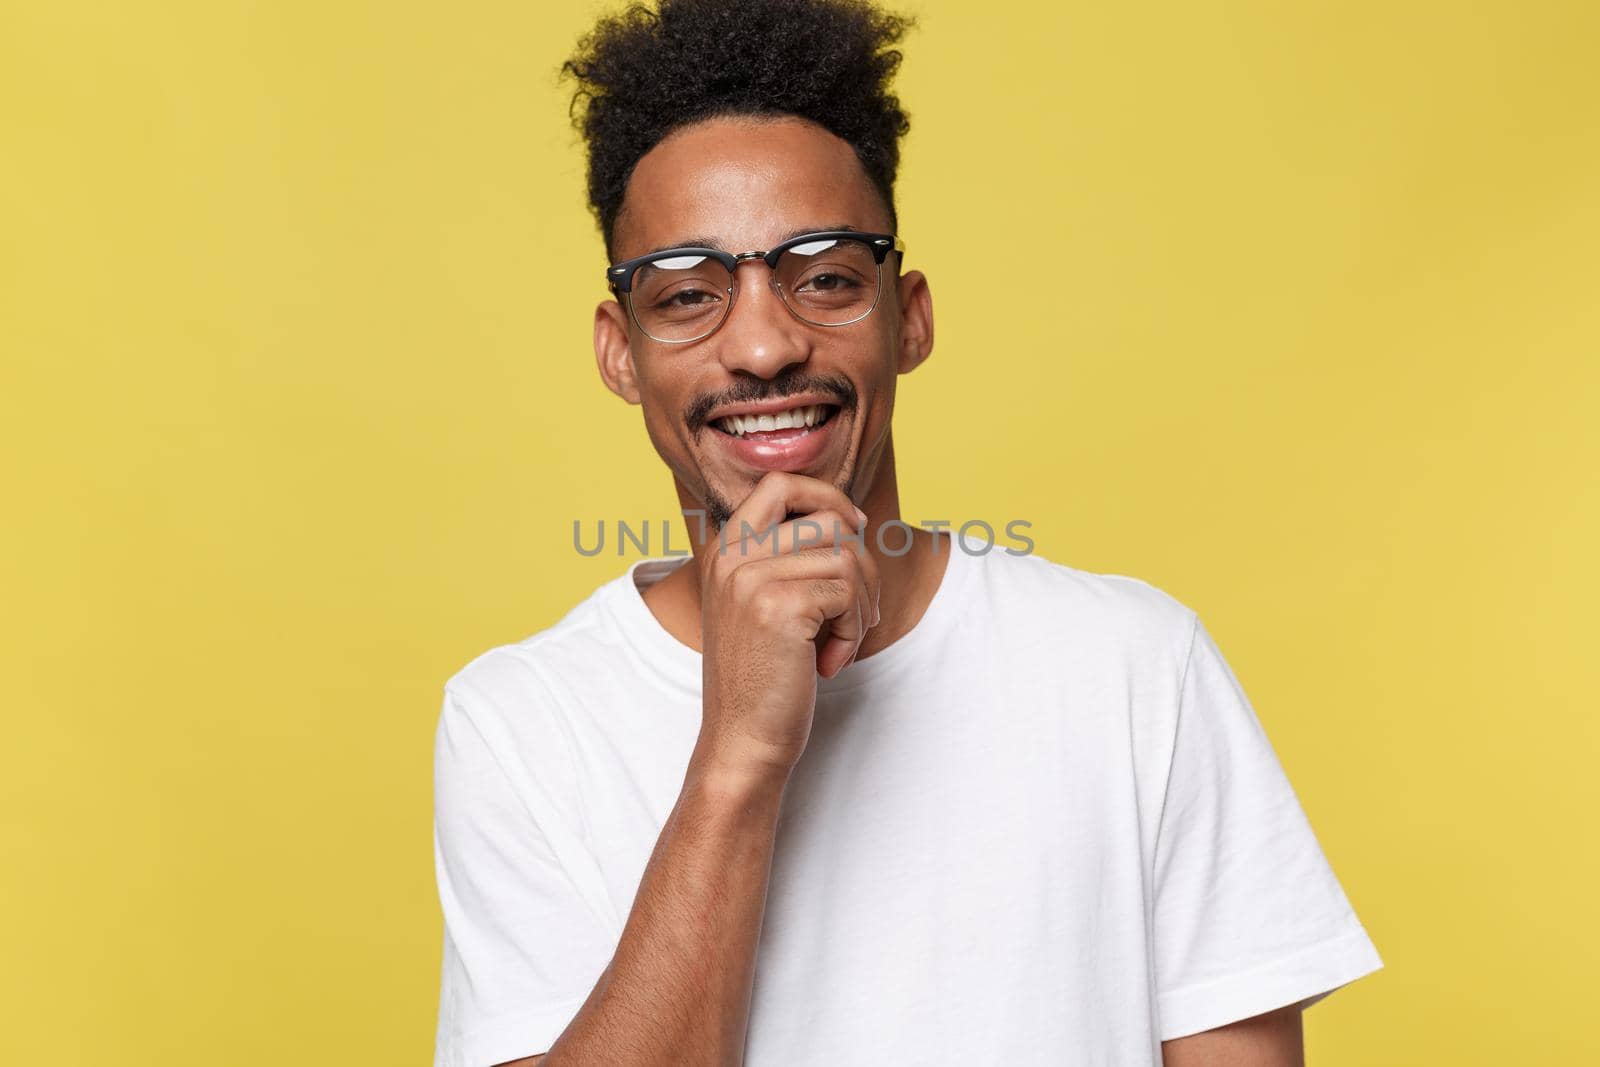 Headshot of good-looking positive young dark-skinned male with stubble and trendy haircut wearing white shirt while posing isolated against blank studio wall background with copy space for your text.